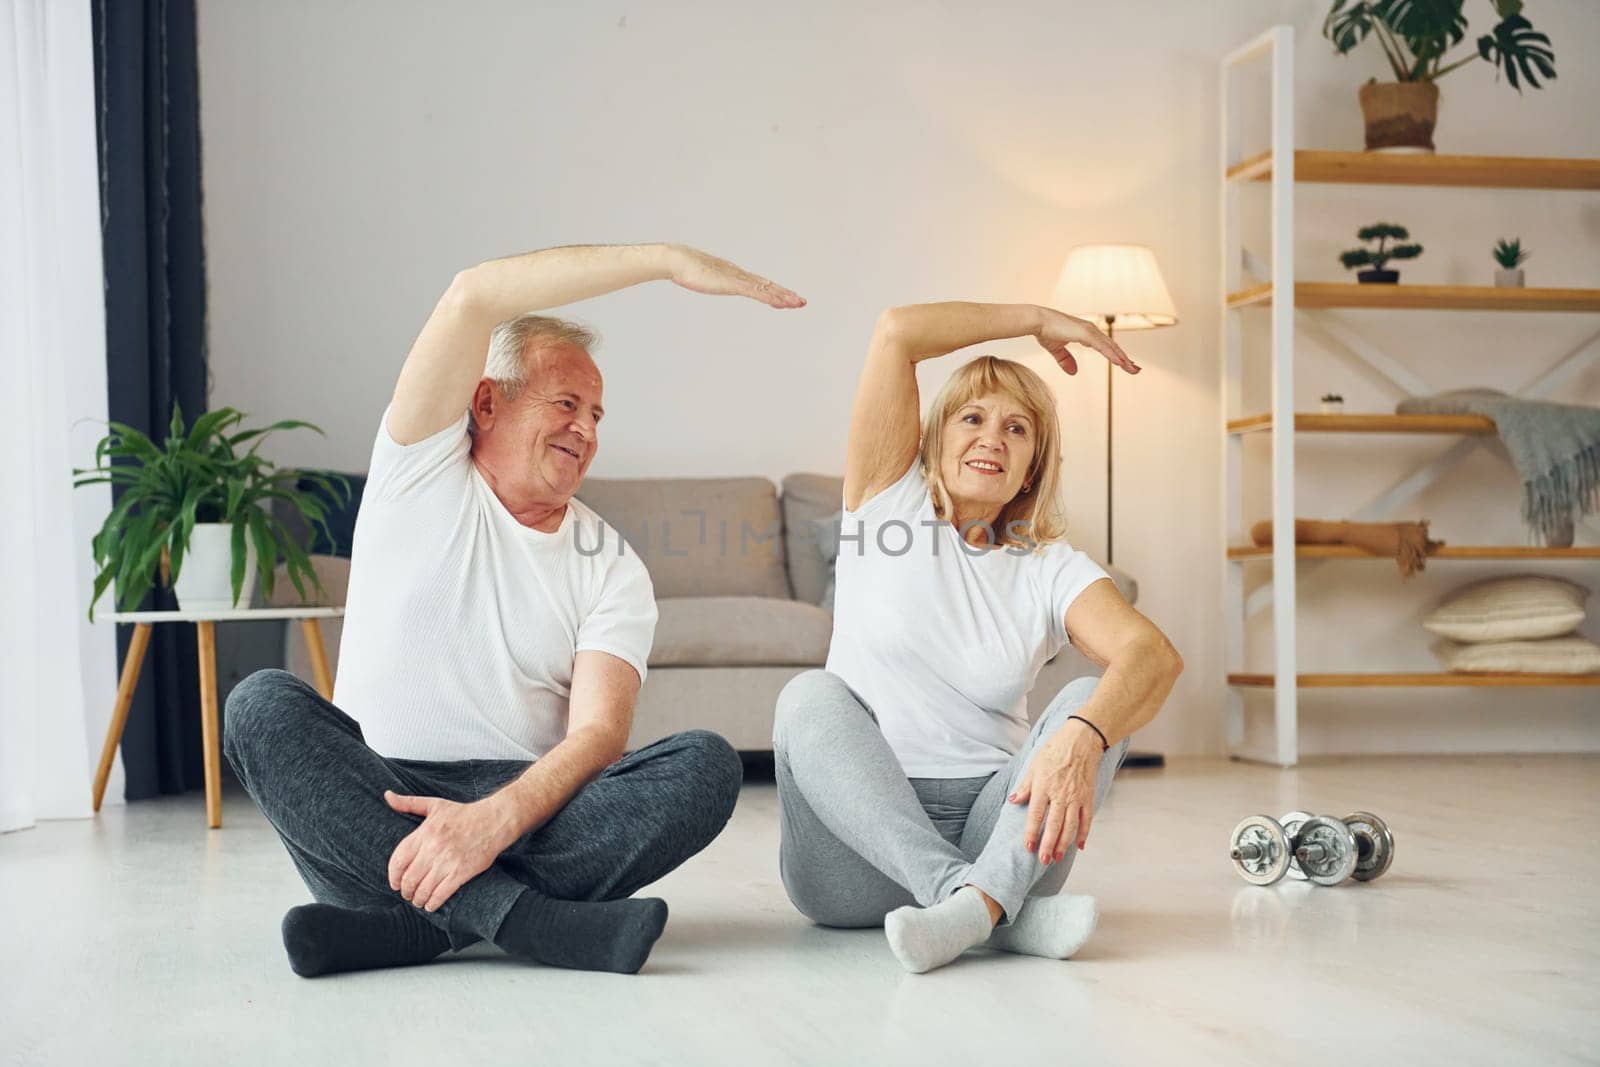 Sitting and doing exercises. Senior man and woman is together at home.